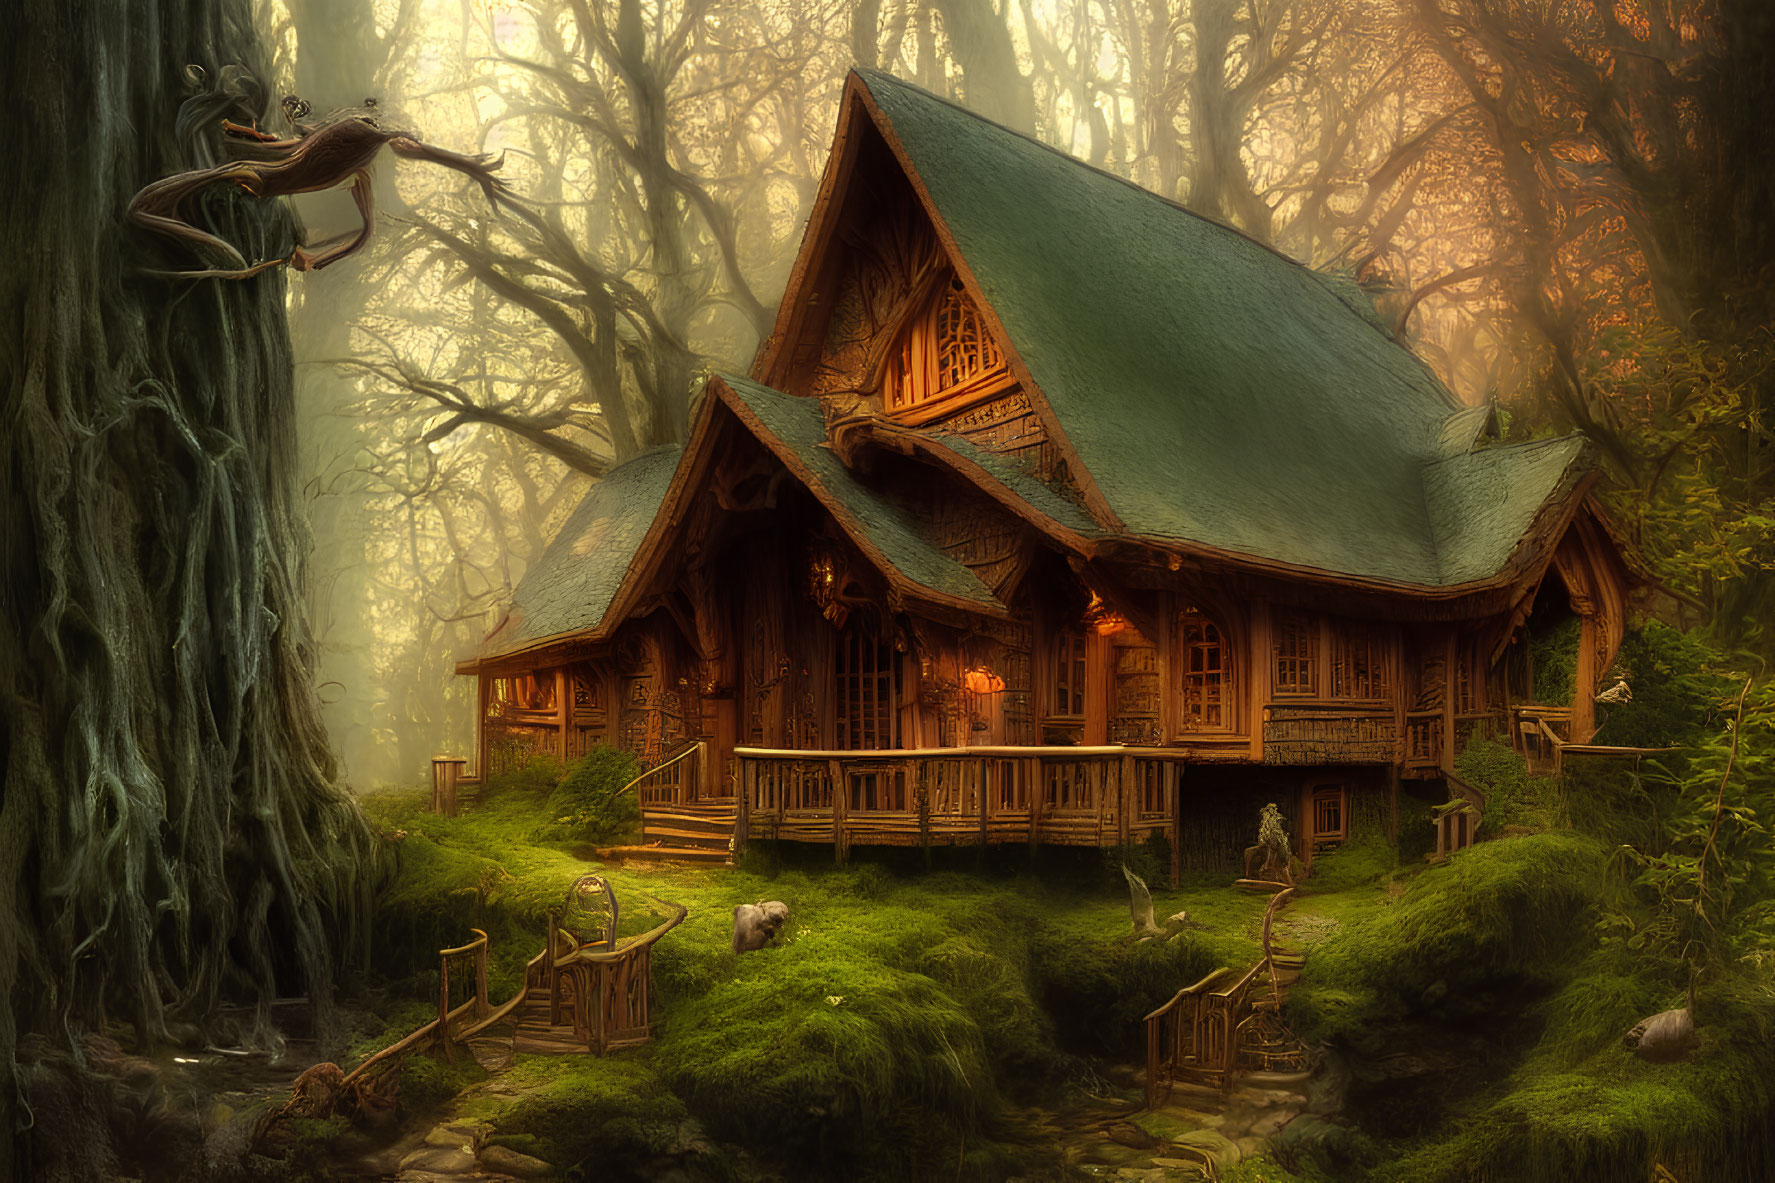 Enchanted forest wooden cottage with green roofs and grazing sheep